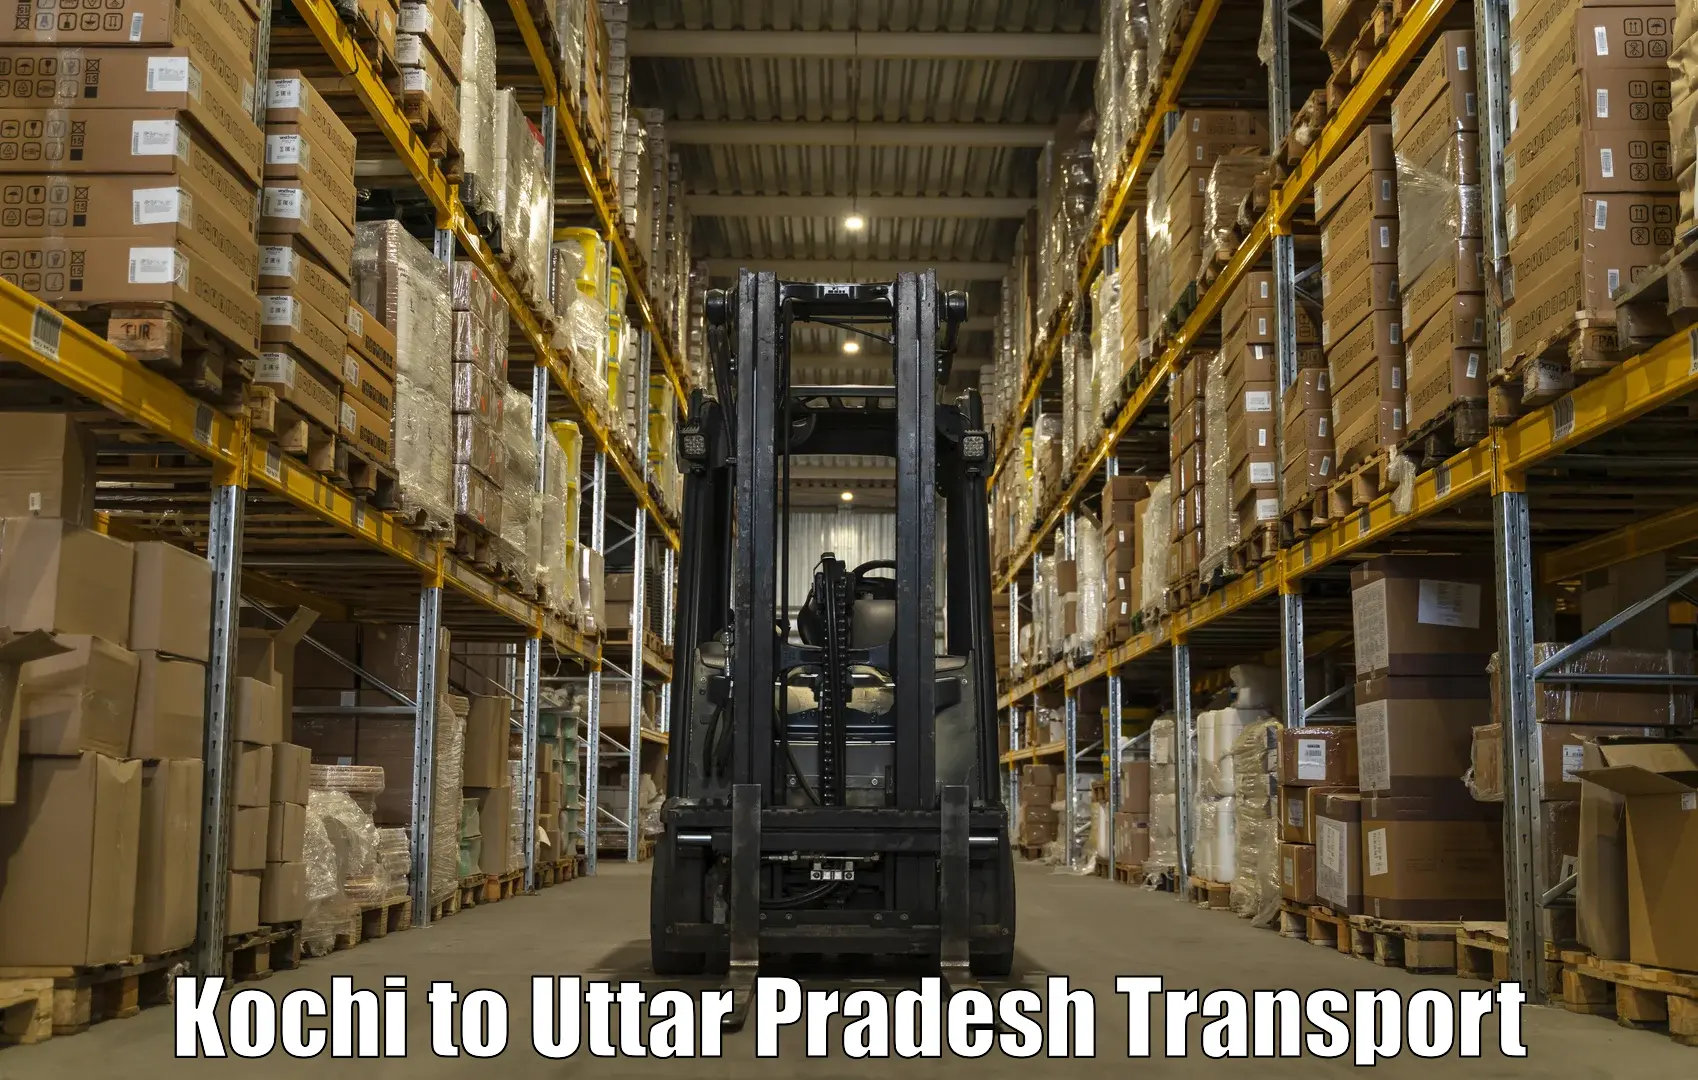 Commercial transport service Kochi to Kanpur